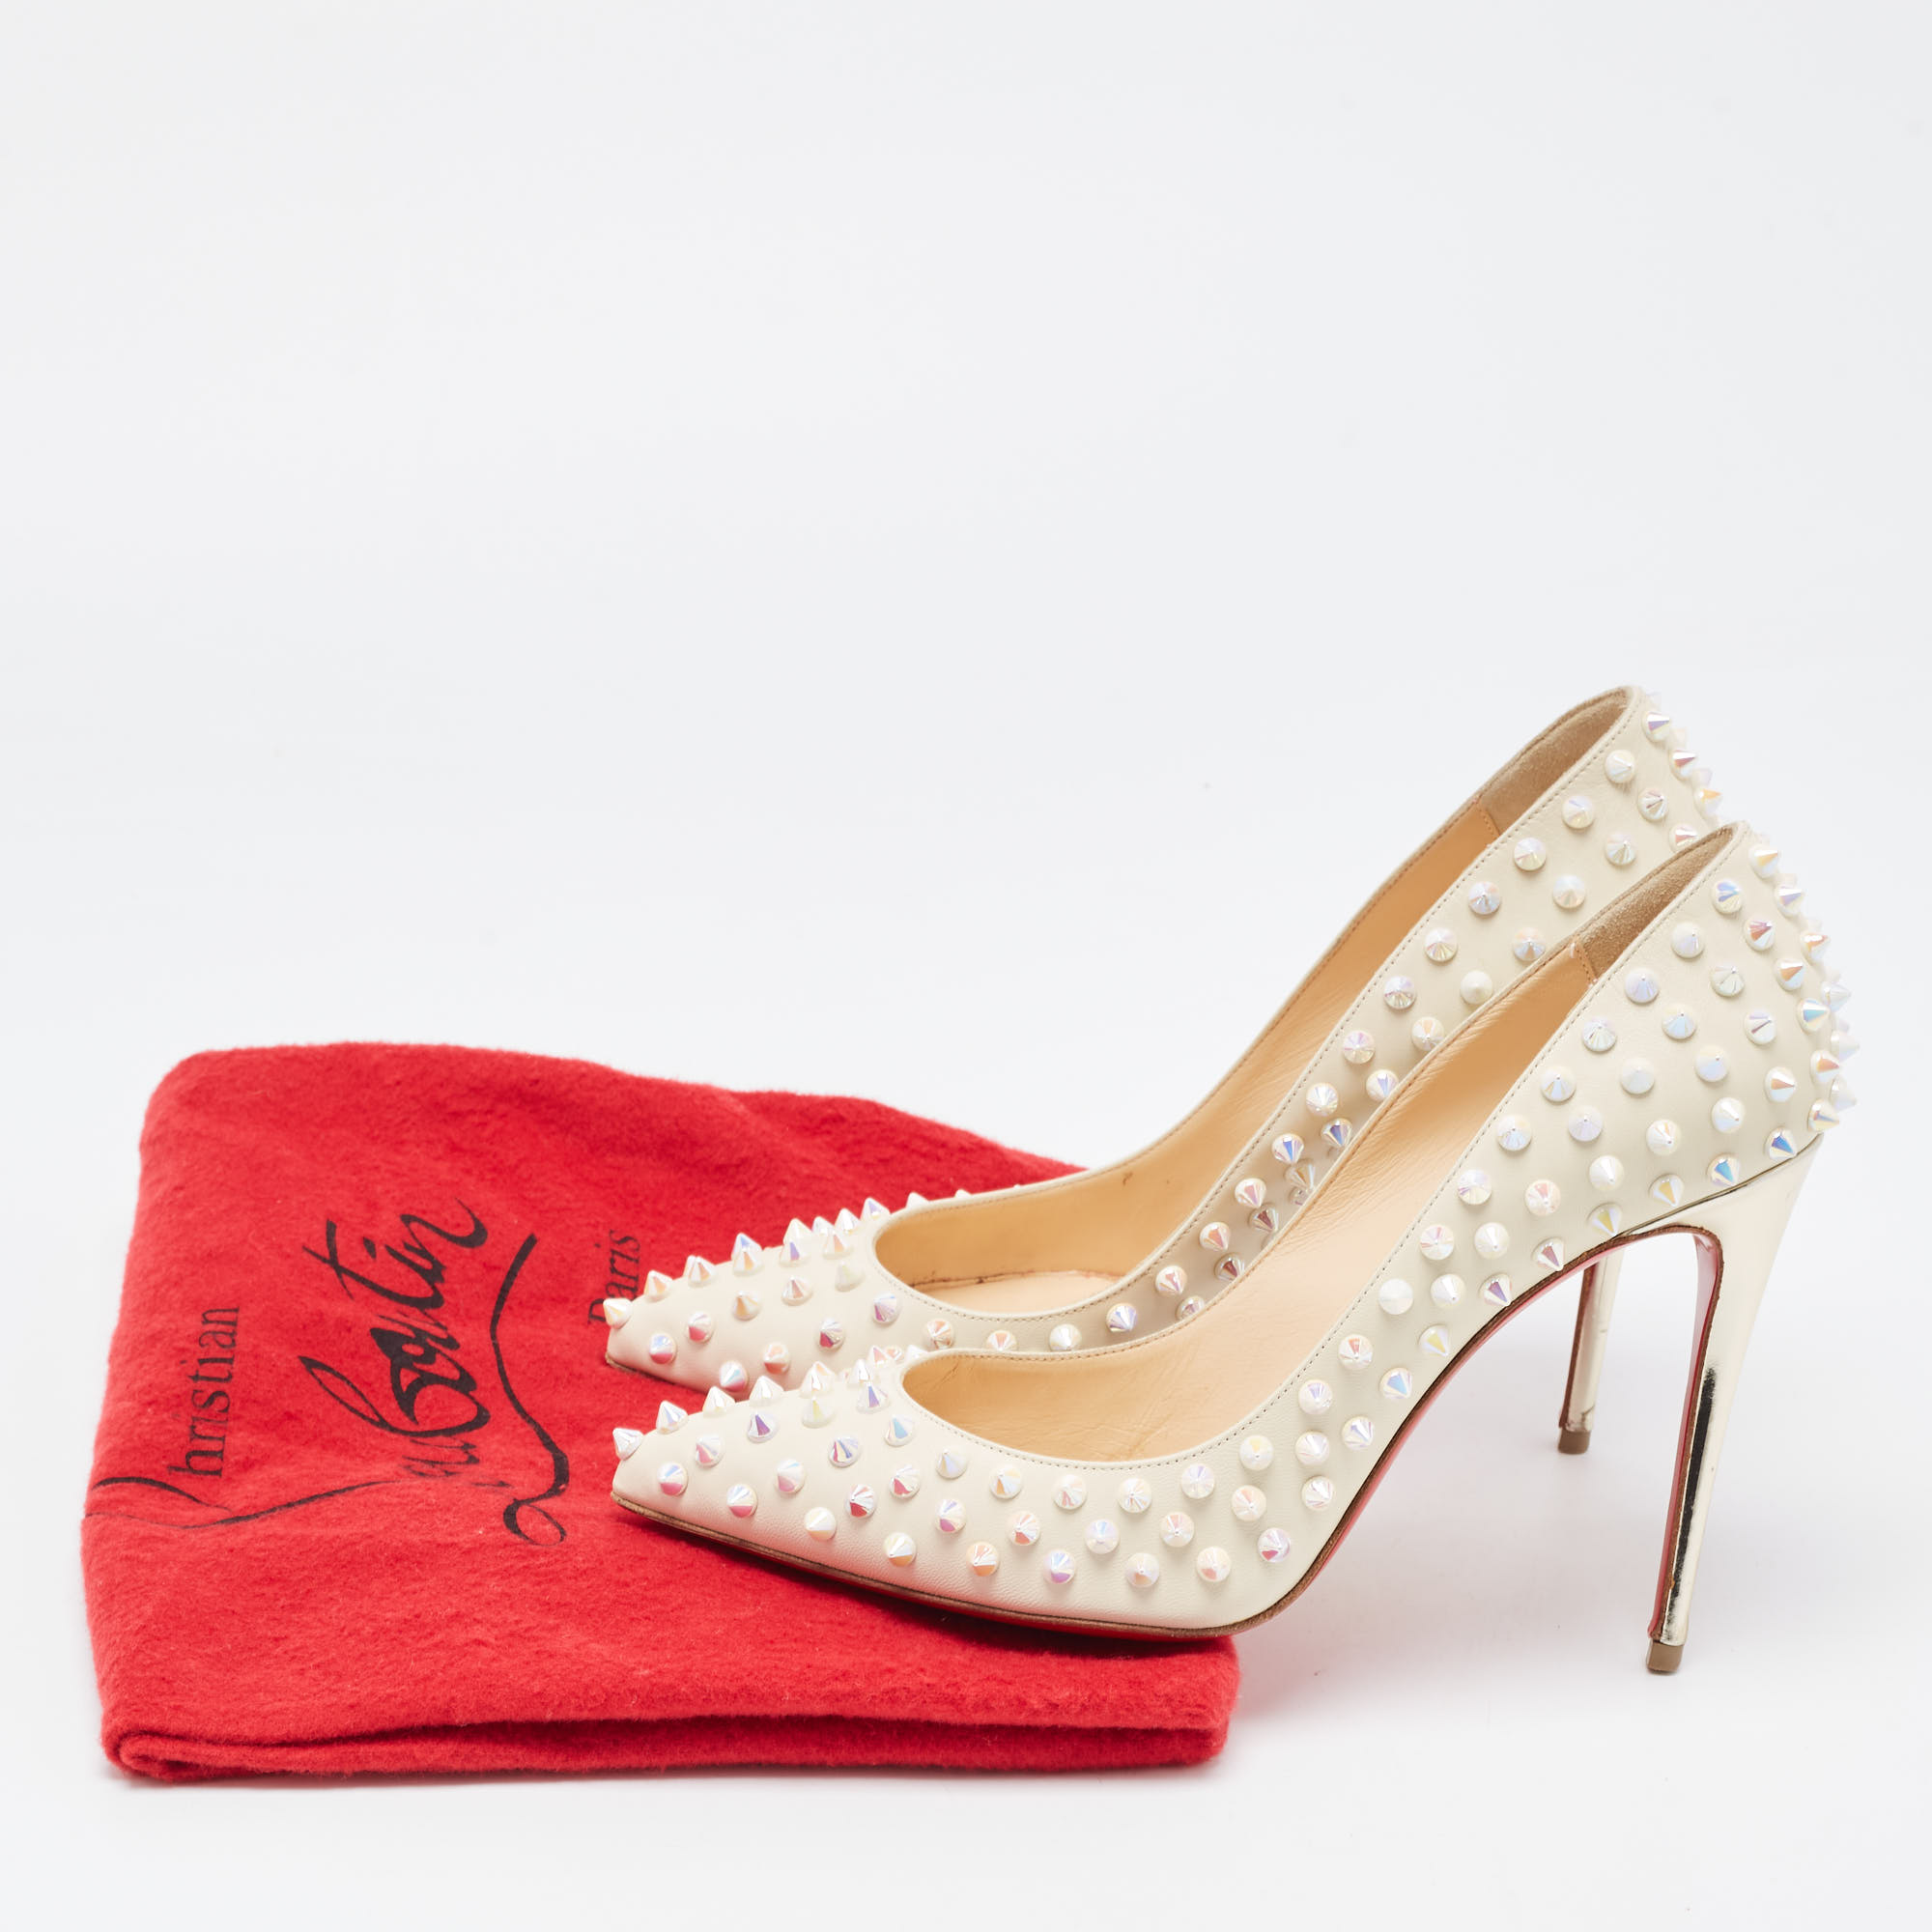 Christian Louboutin Cream Leather Pigalle Spikes Pumps Size 38